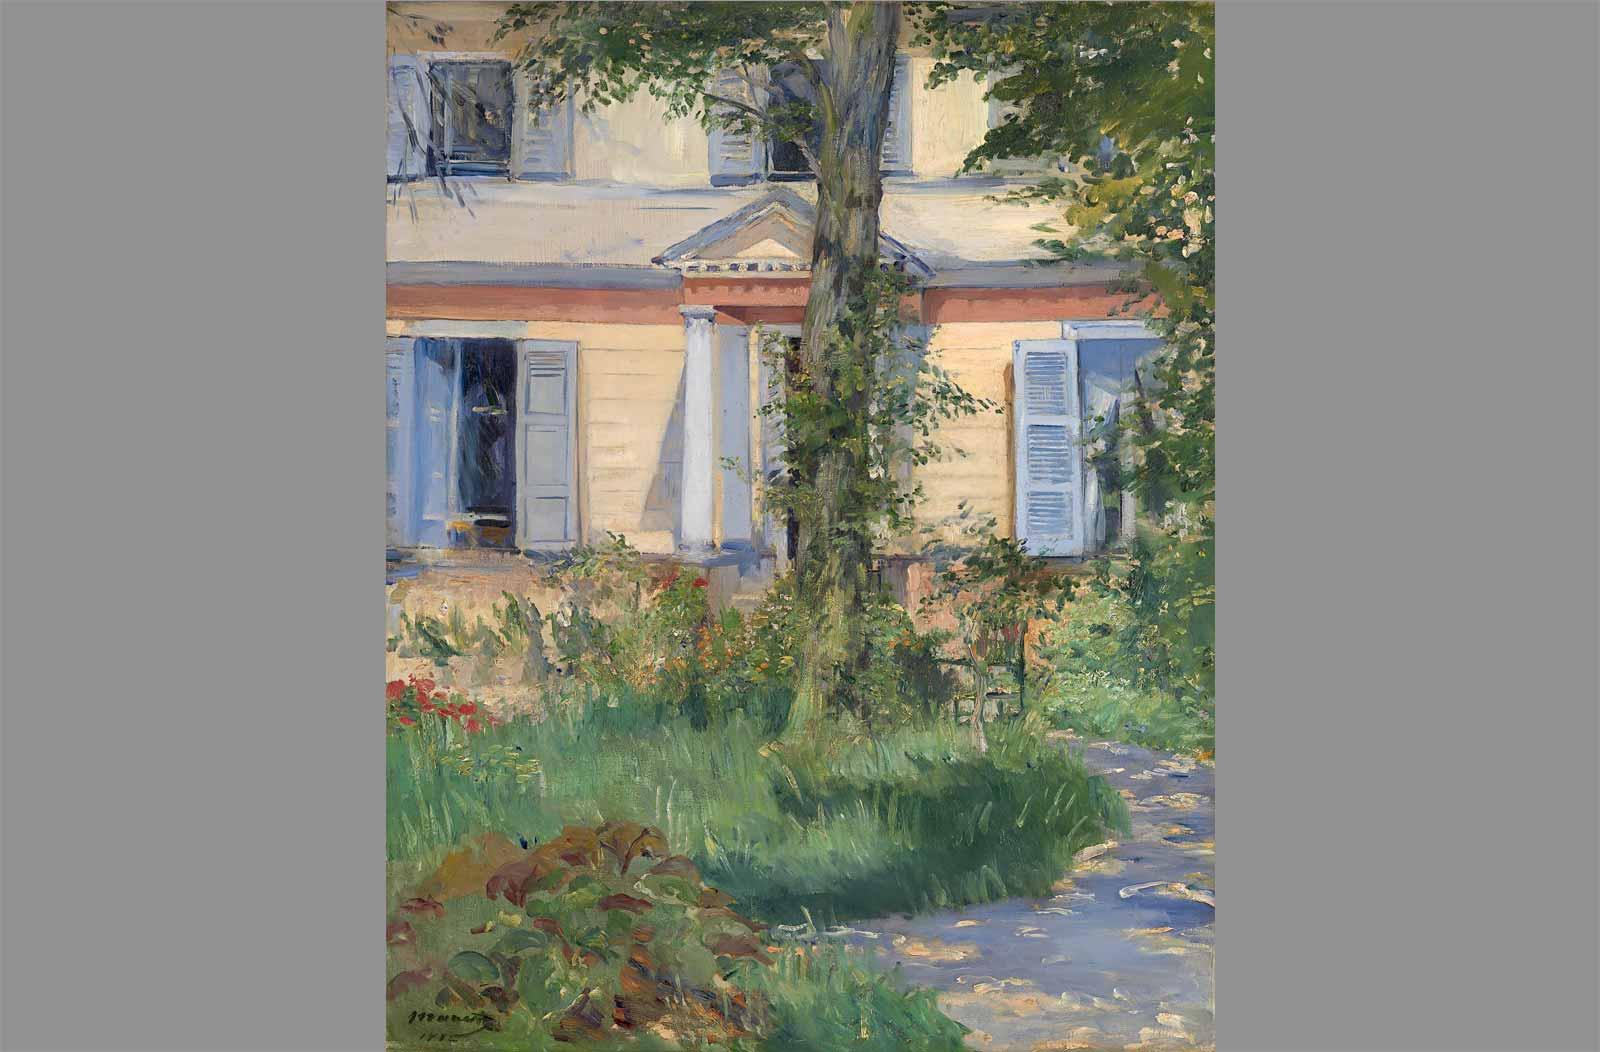 Édouard Manet. The House at Rueil, 1882.